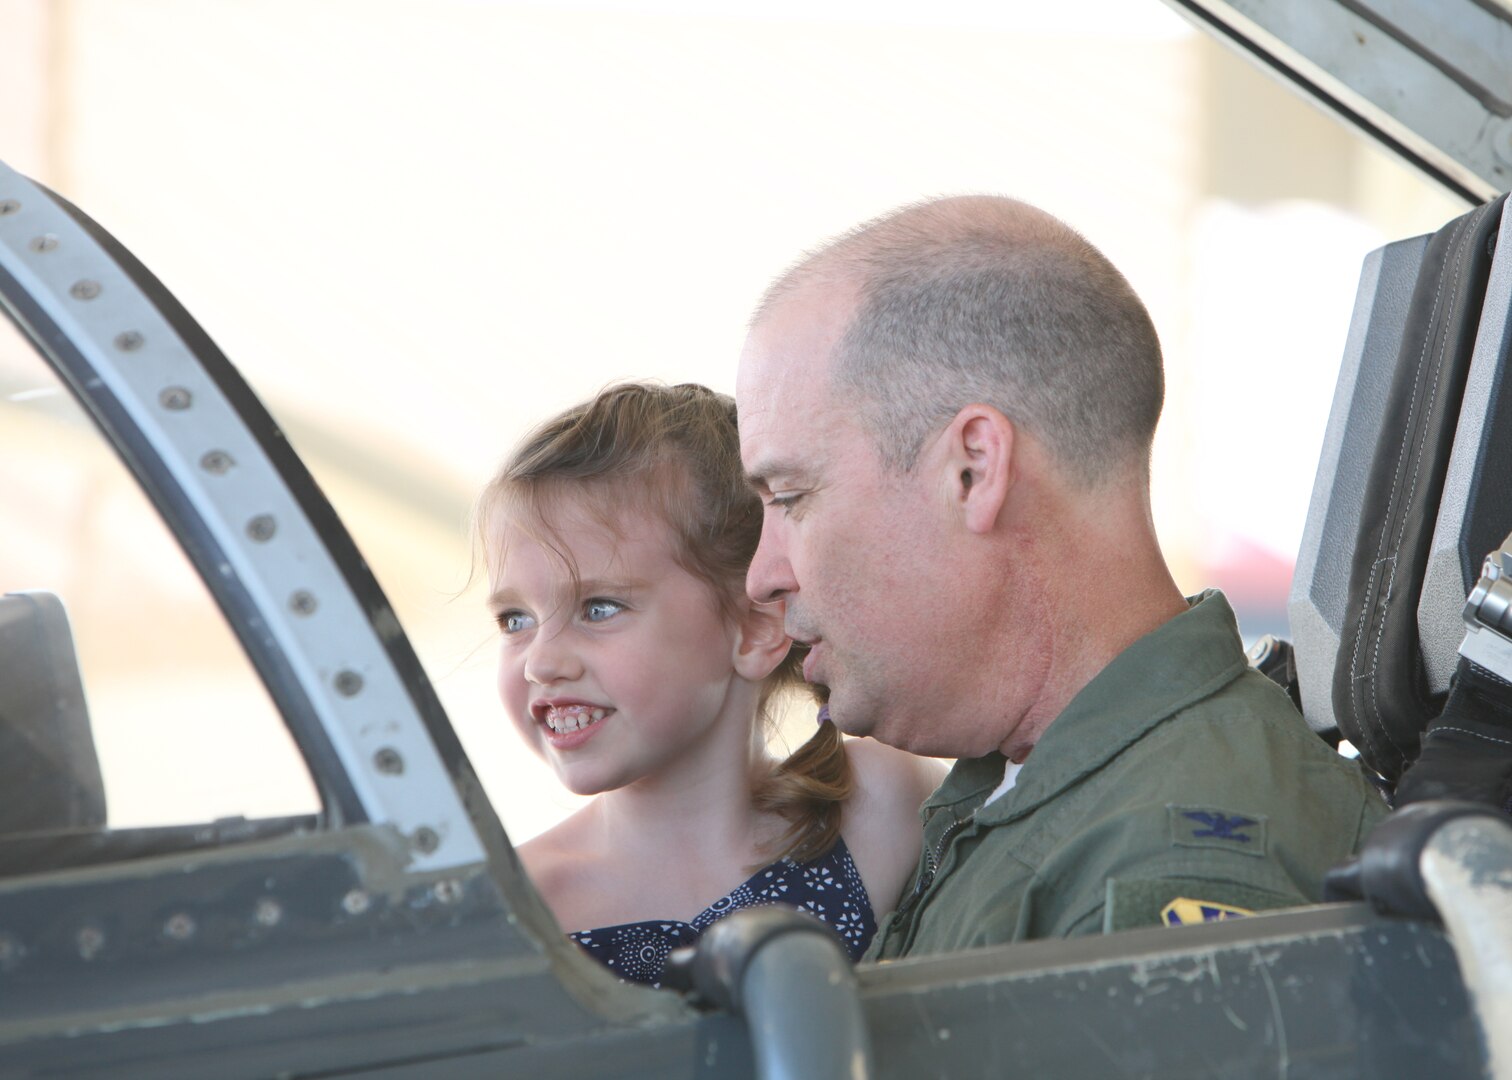 Col. David Drichta, 12th Operations Group deputy commander, shows his daughter, Natalie, the cockpit of the T-38C Talon, following his first flight back after his battle with cancer at Joint Base San Antonio-Randolph, Texas June 19, 2013.  Drichta was diagnosed with Stage IV cancer in February 2012 and, after more than a year in recovery, was medically cleared to return to flight status.  The flight marked his return to flight status as well as his 3,000th flight hour in Air Force aircraft. (Courtesy photo by Stacy Nyikos)